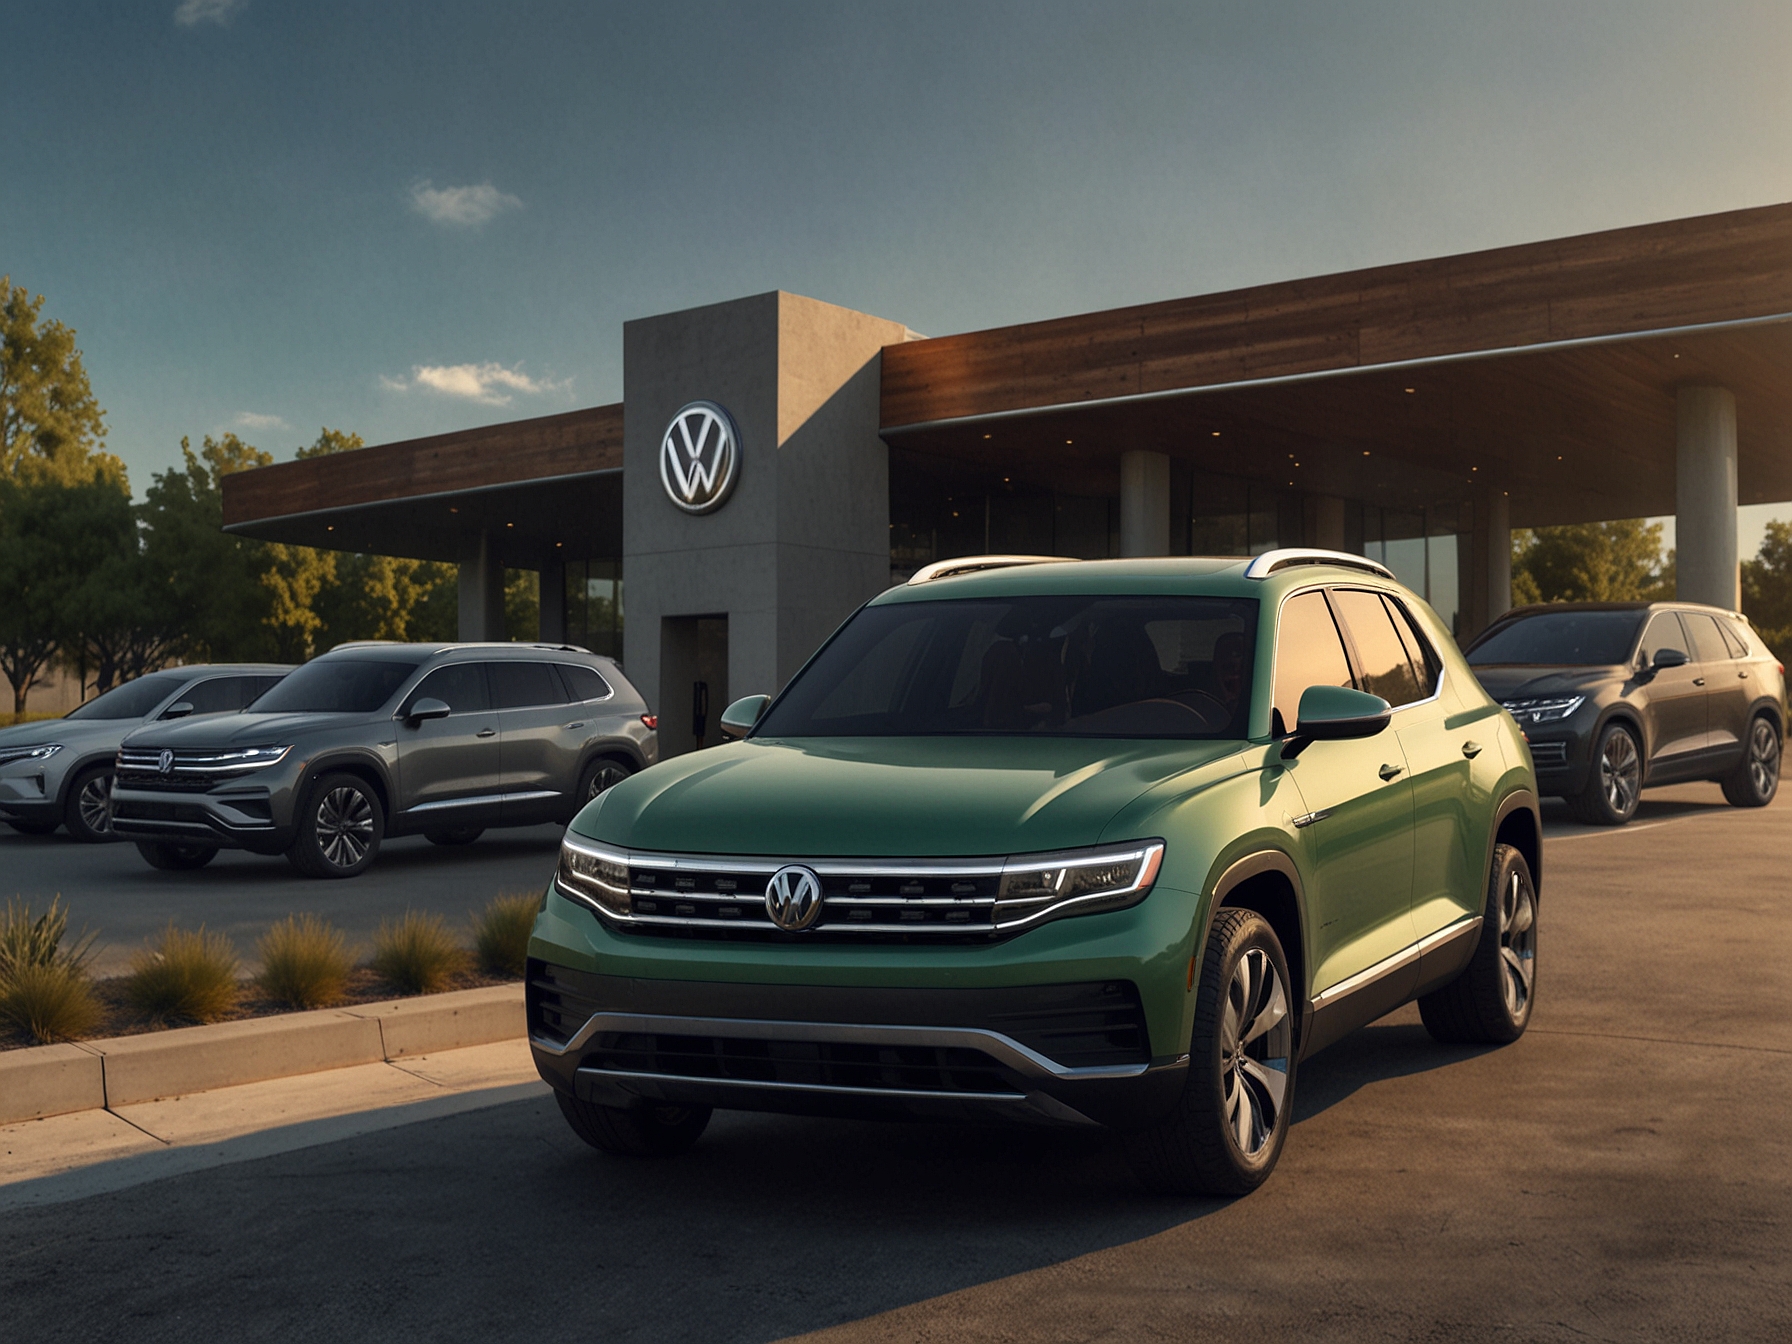 Volkswagen and Rivian logos with electric vehicles in the background, symbolizing the strategic partnership and significant $5 billion investment to advance EV innovation.